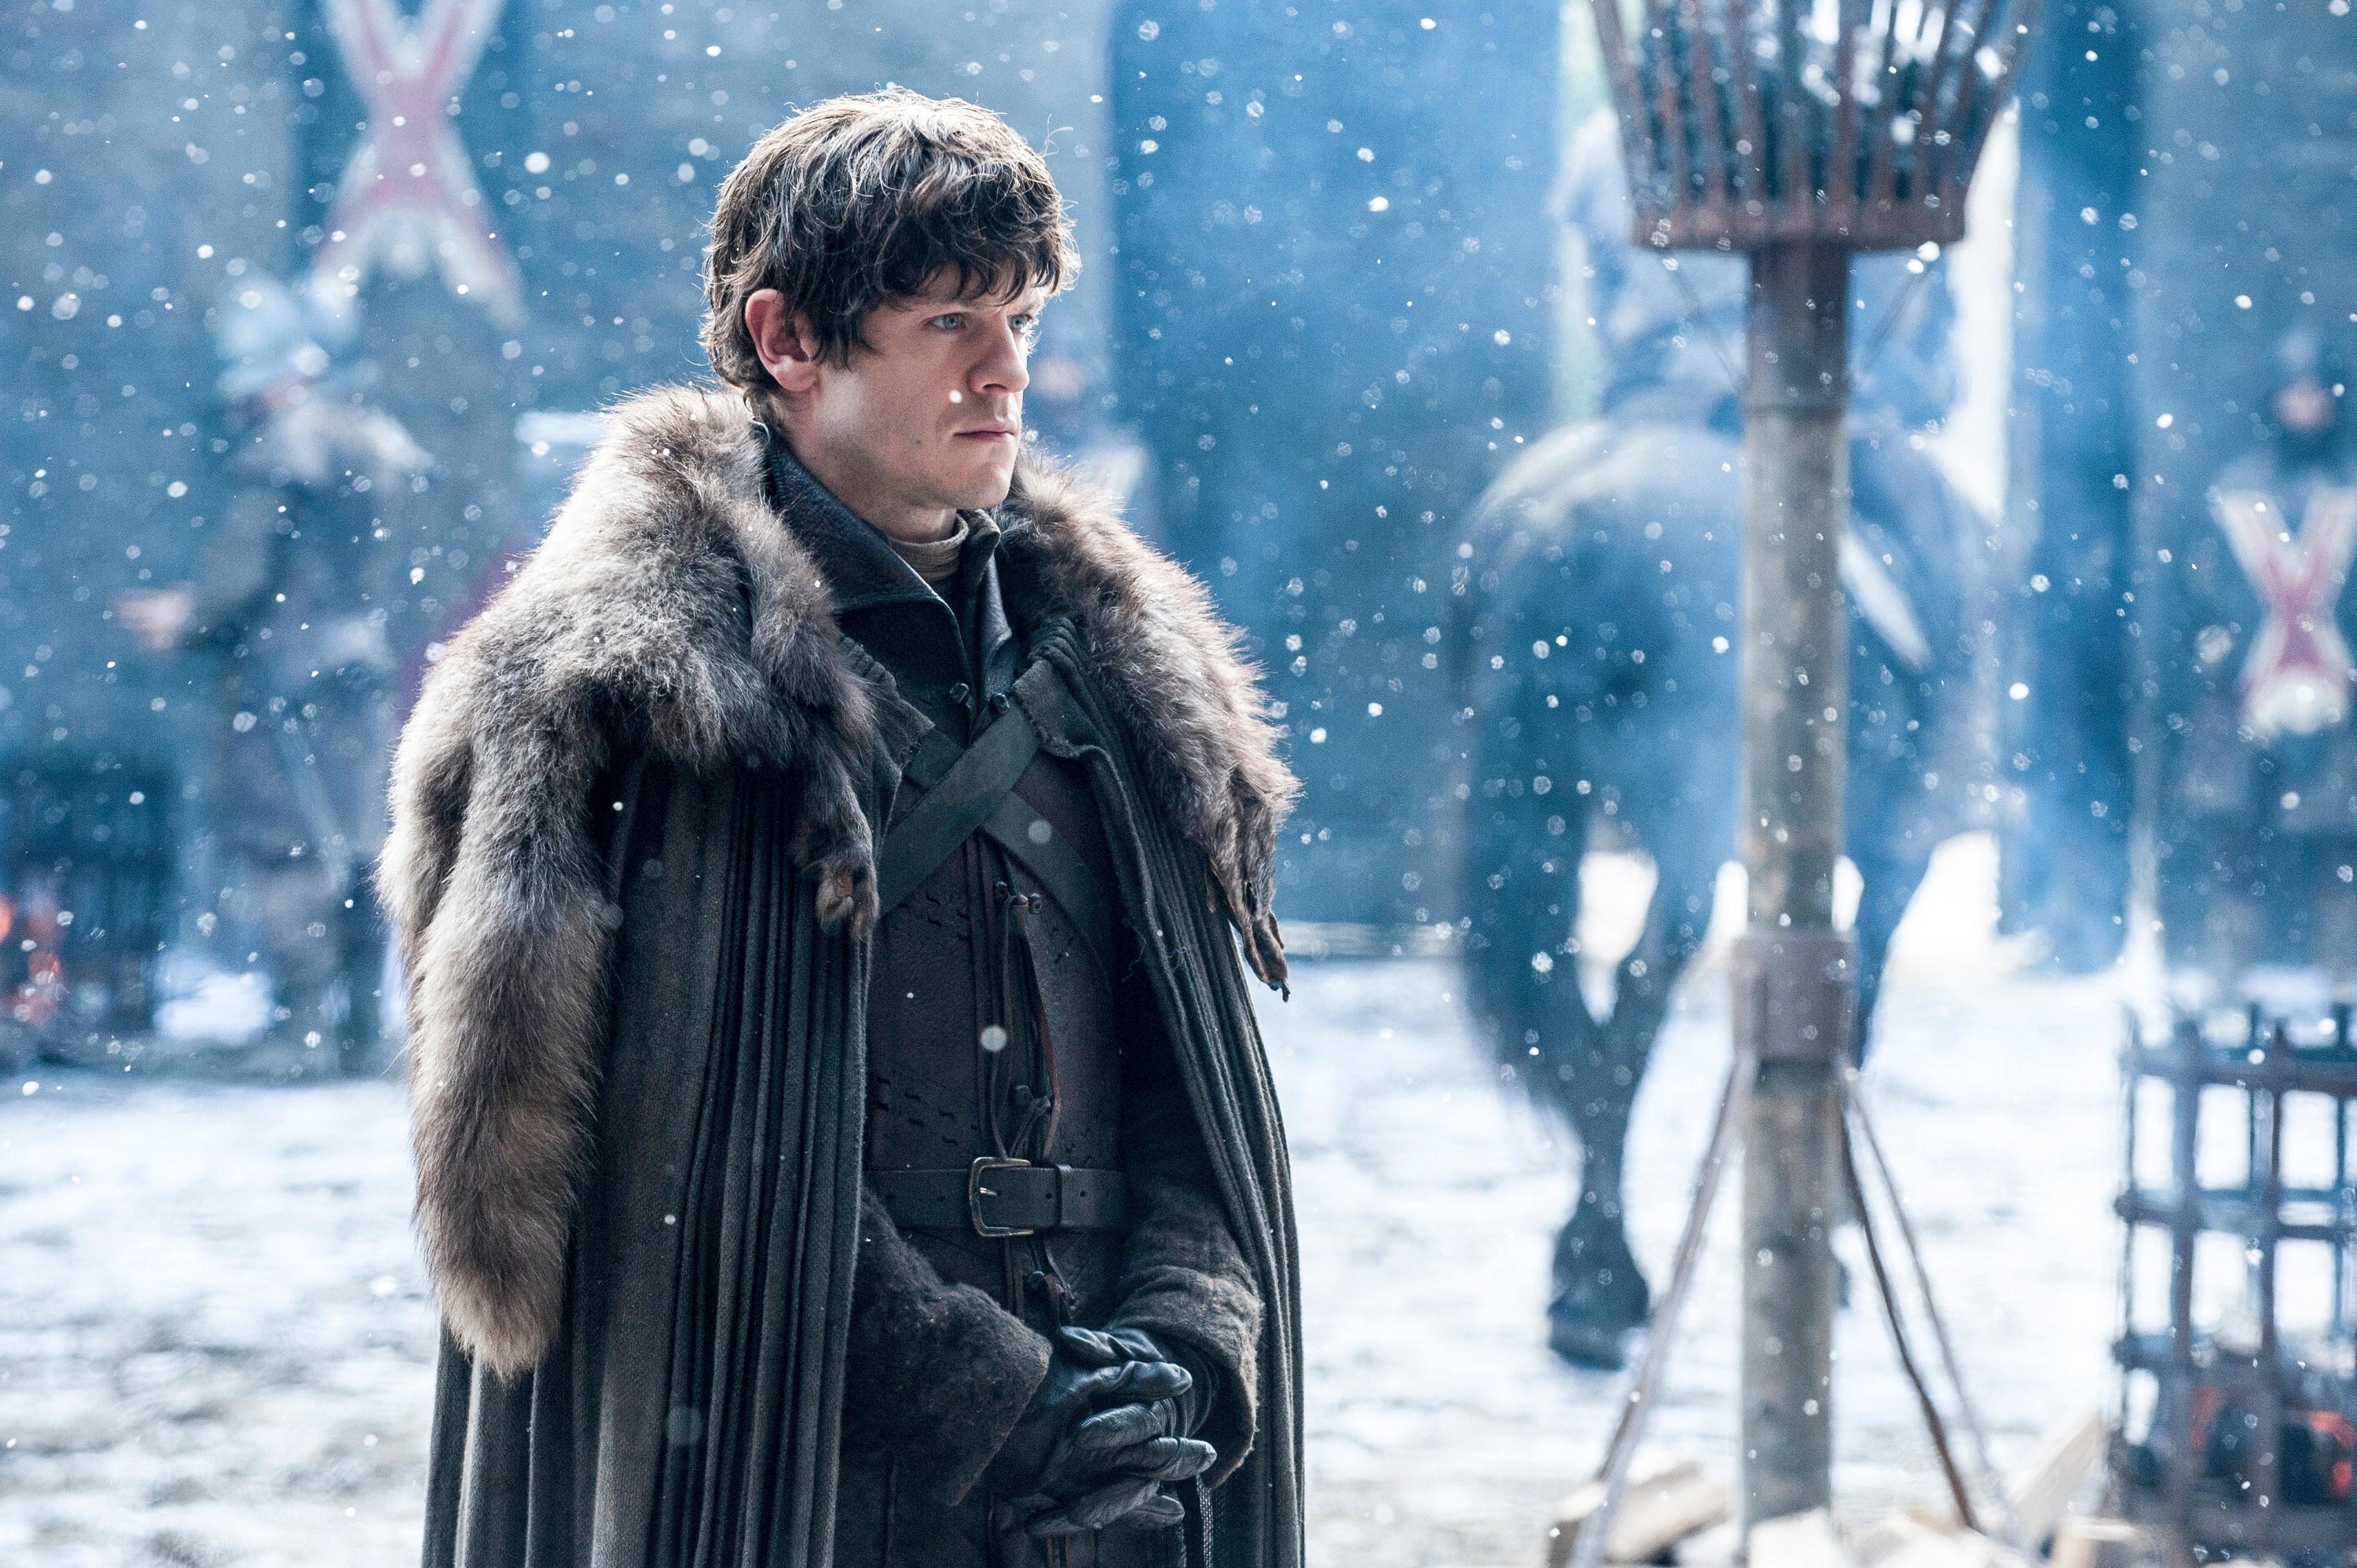 Iwan Rheon as Ramsay Bolton in &quot;Game of Thrones&quot;